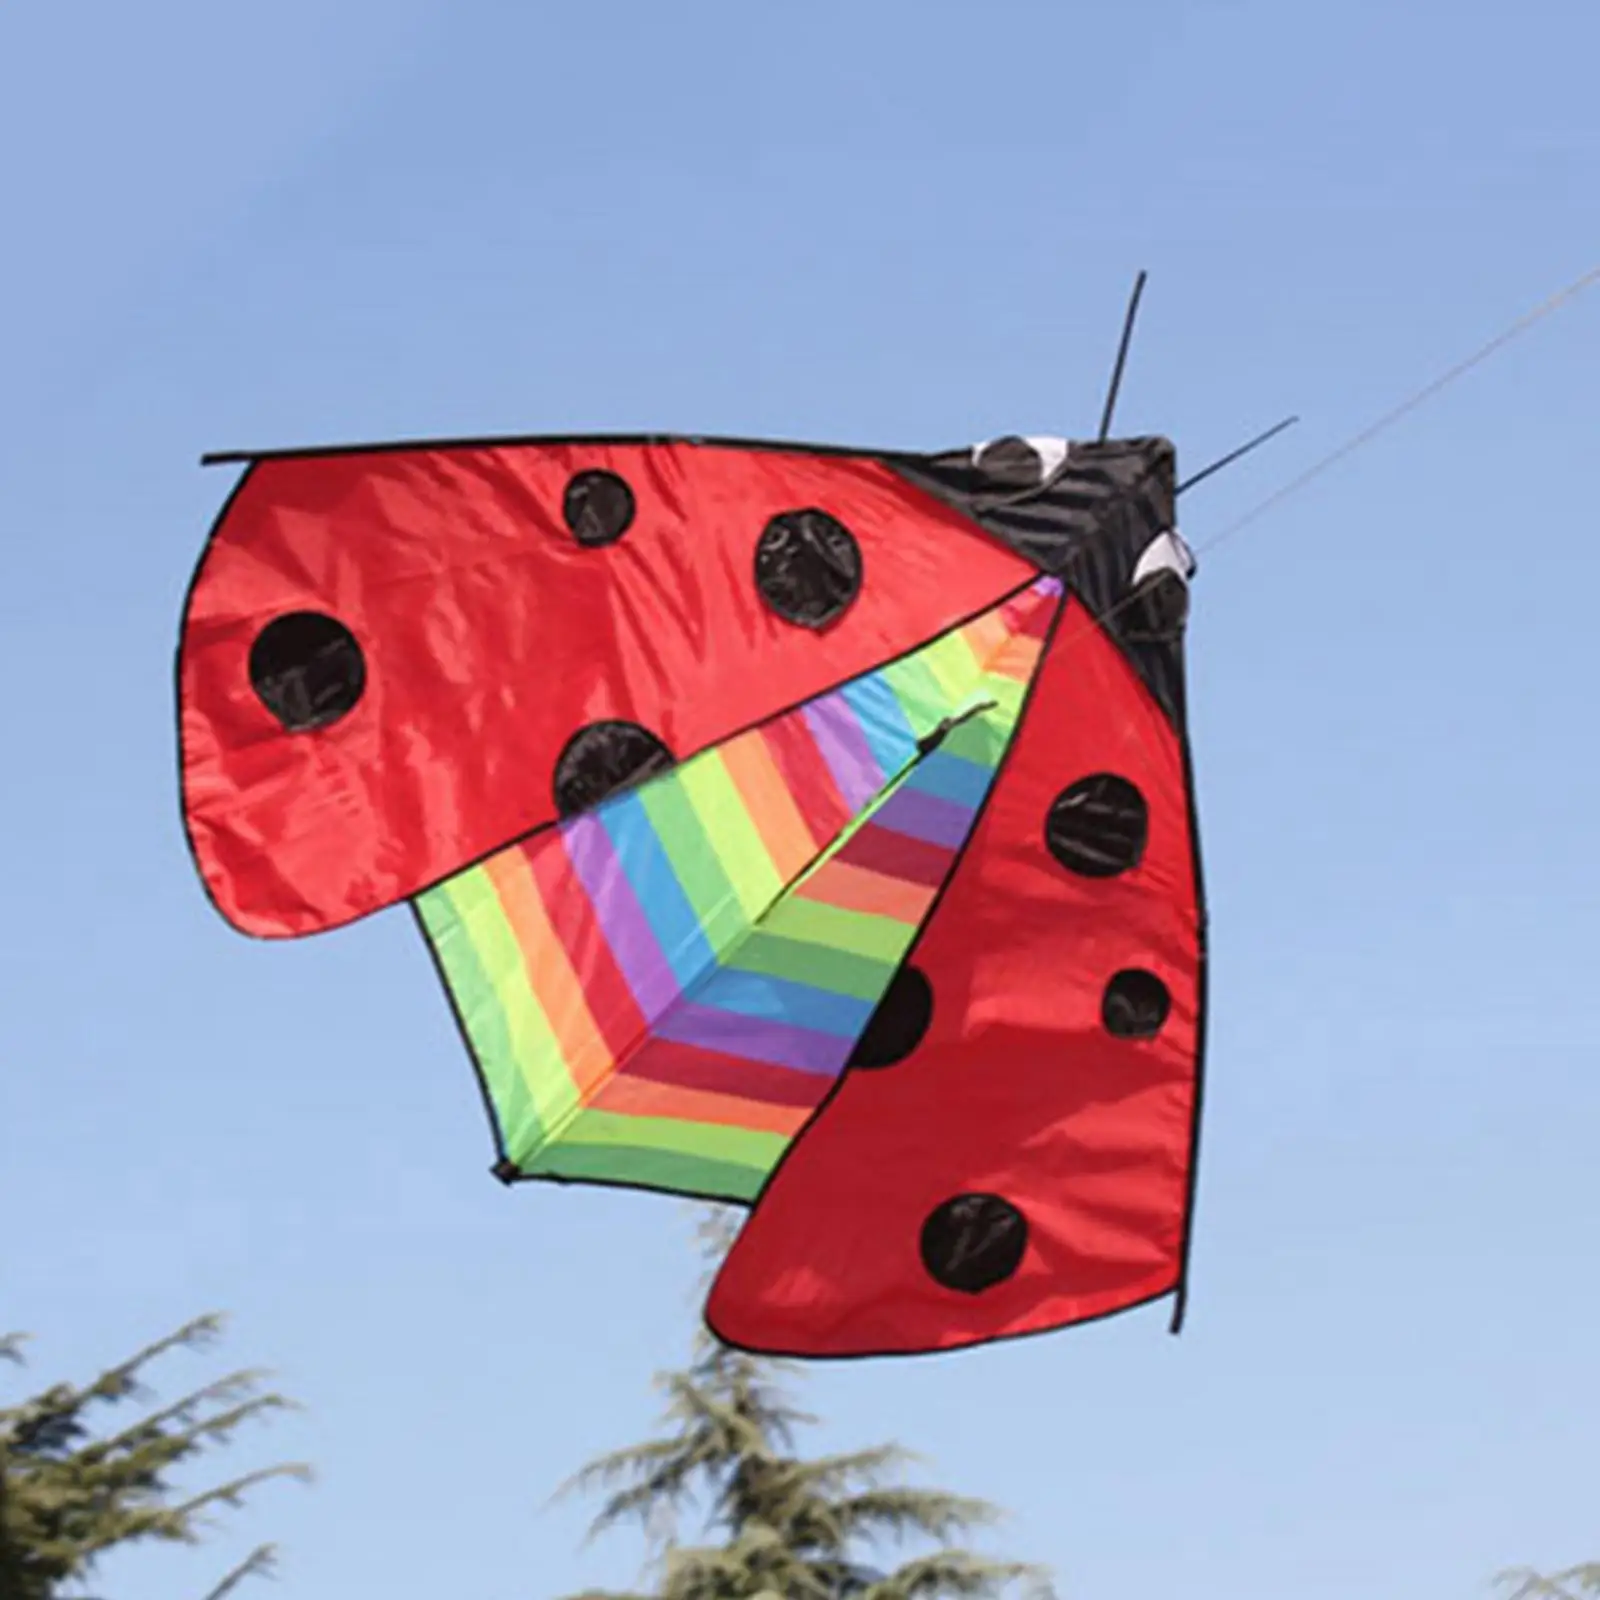 Large Delta Kite Fly Kite Fun Toy Windsock Huge  Vivid Triangle Ladybug Kite for Park Beach Sports  Trips